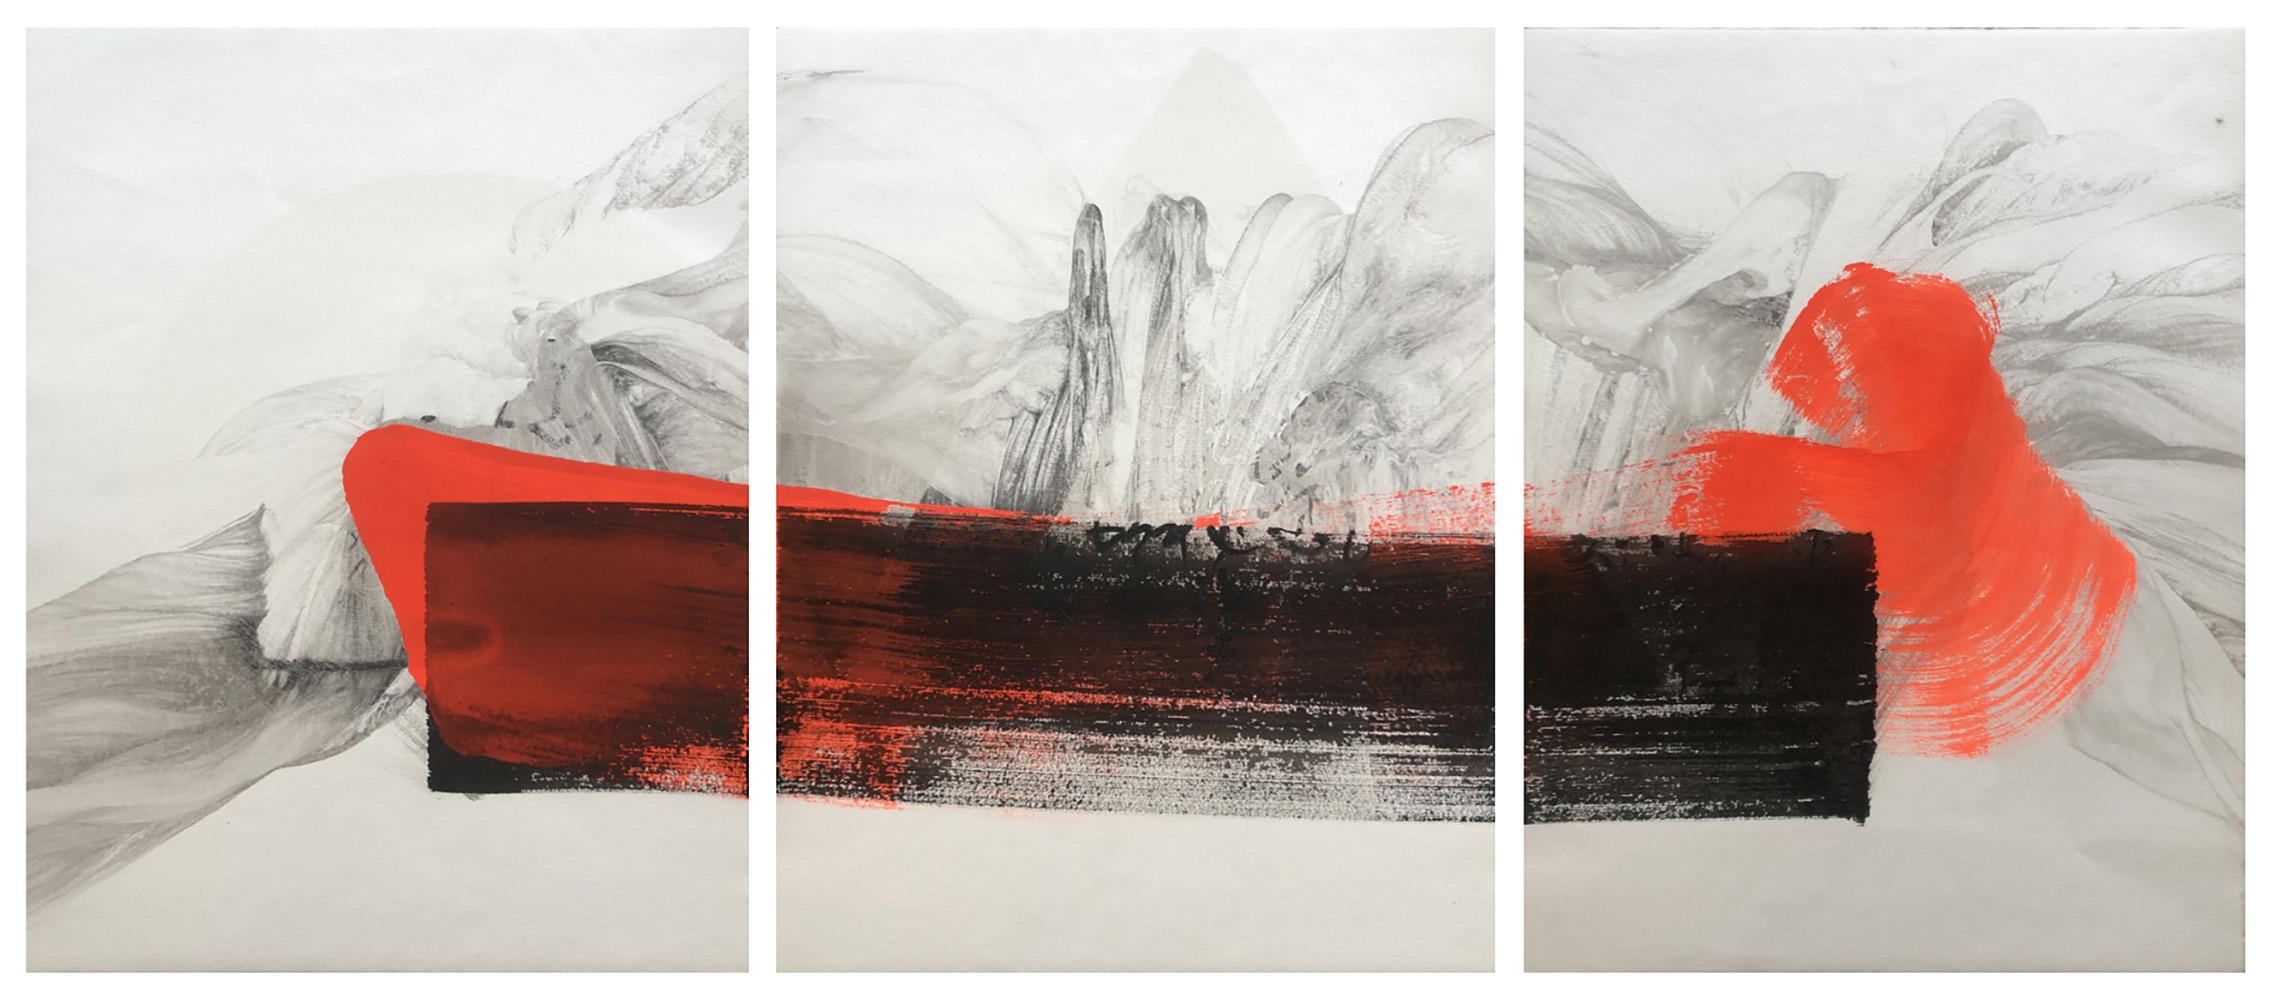 Permanescence N405-T, by Japanese contemporary artist Hachiro Kanno. 
Ink and acrylic on paper. This original work is a triptych composed of three paper panels of equal size (65 cm x 50 cm) and is sold unframed.
The painter draws its resources from